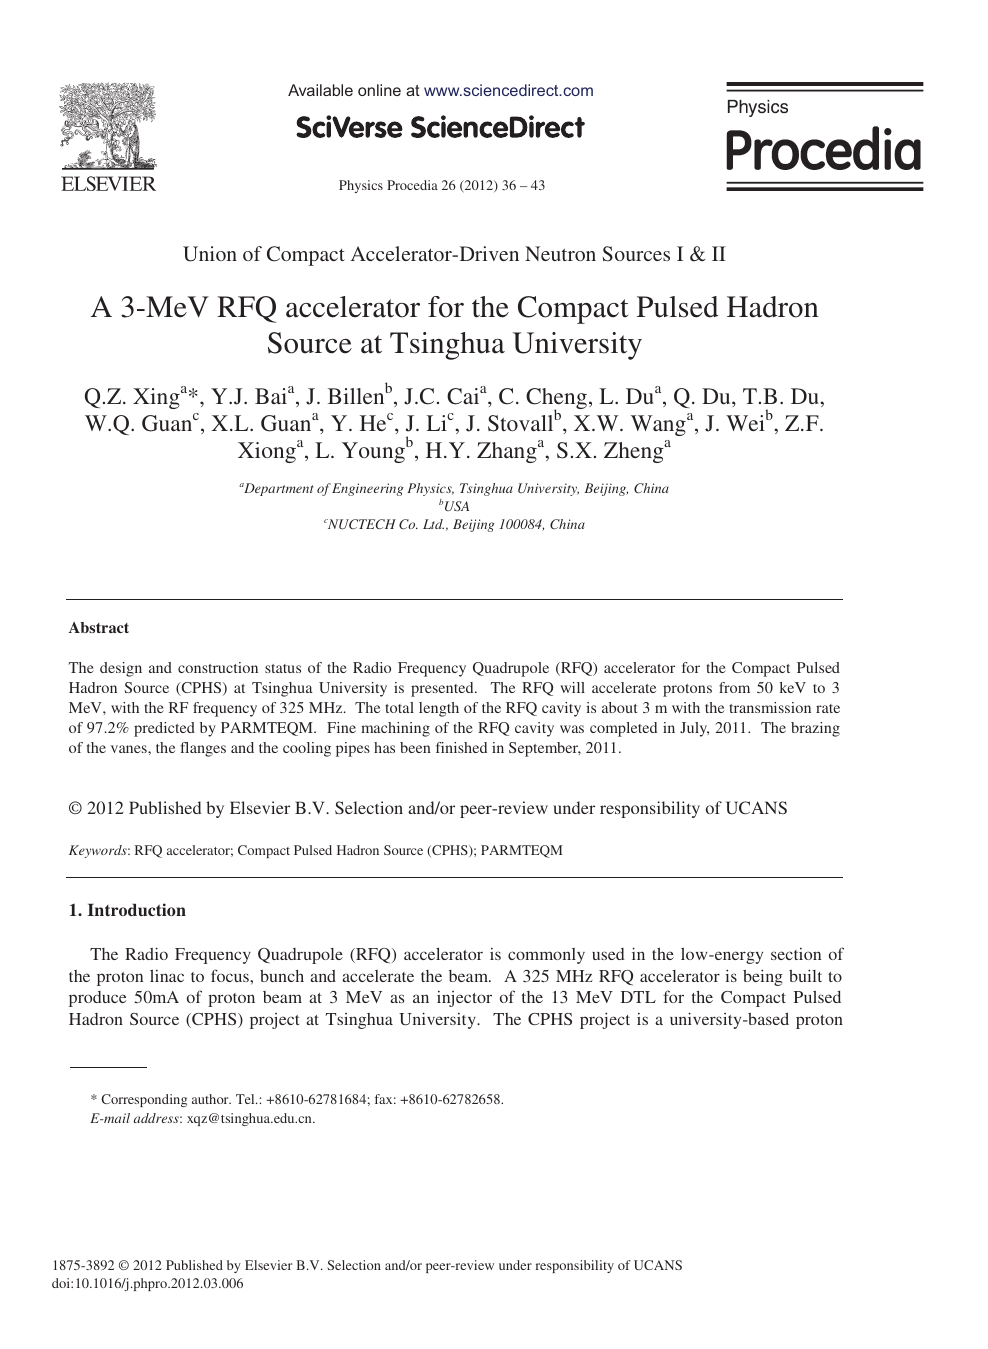 A 3 Mev Rfq Accelerator For The Compact Pulsed Hadron Source At Tsinghua University Topic Of Research Paper In Materials Engineering Download Scholarly Article Pdf And Read For Free On Cyberleninka Open